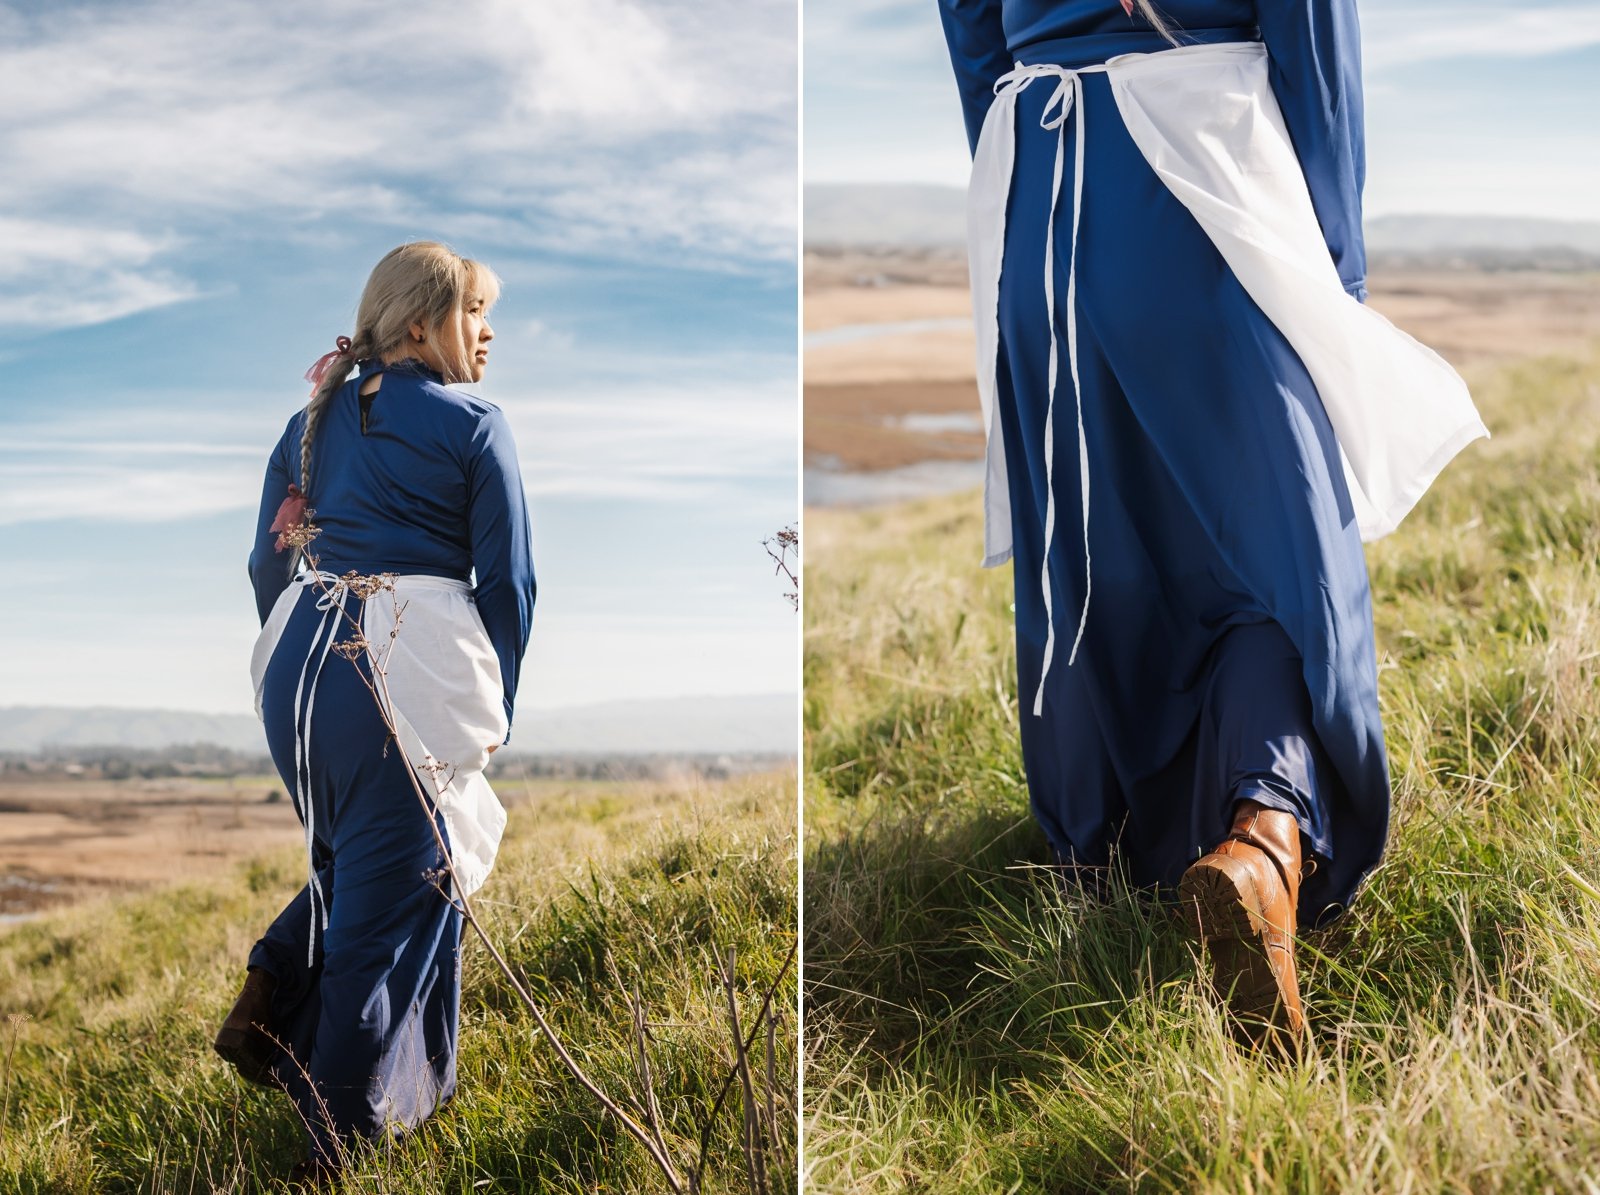 howl's moving castle sophie cosplay photoshoot bay area cosplay photographer 11.jpg